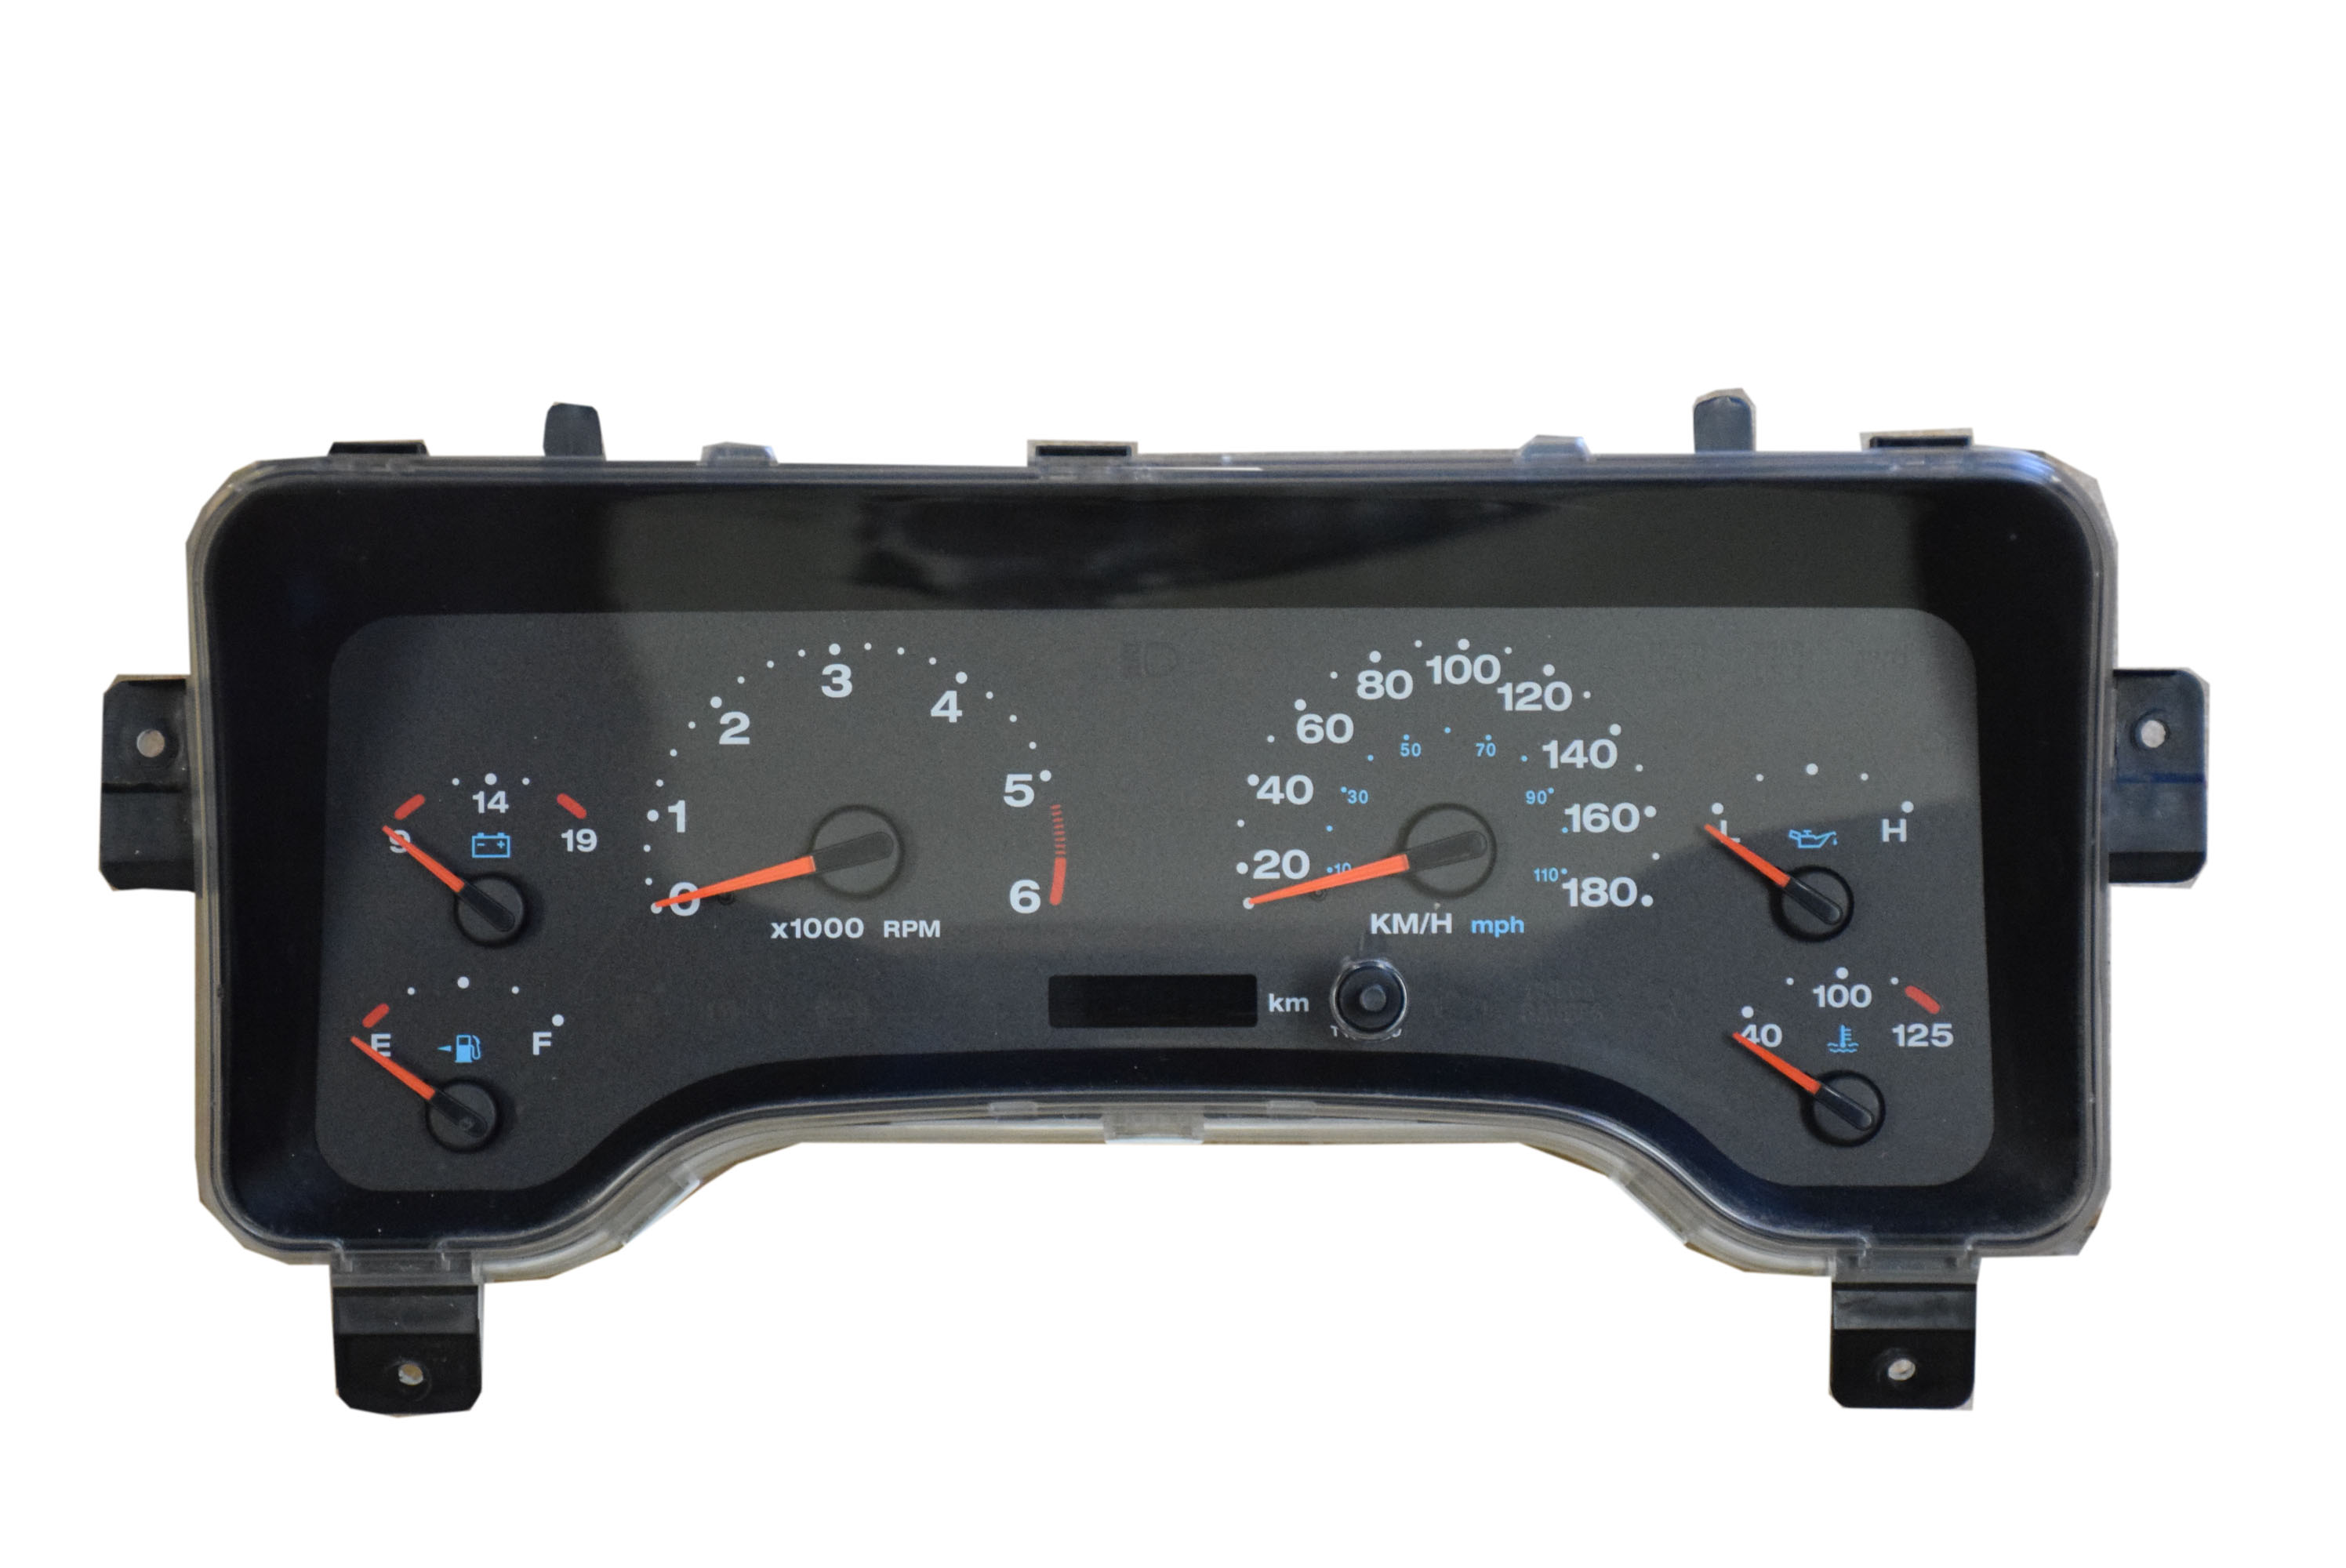 2005 JEEP TJ USED DASHBOARD INSTRUMENT CLUSTER FOR SALE (KM/H) - DASHBOARD  INSTRUMENT CLUSTER